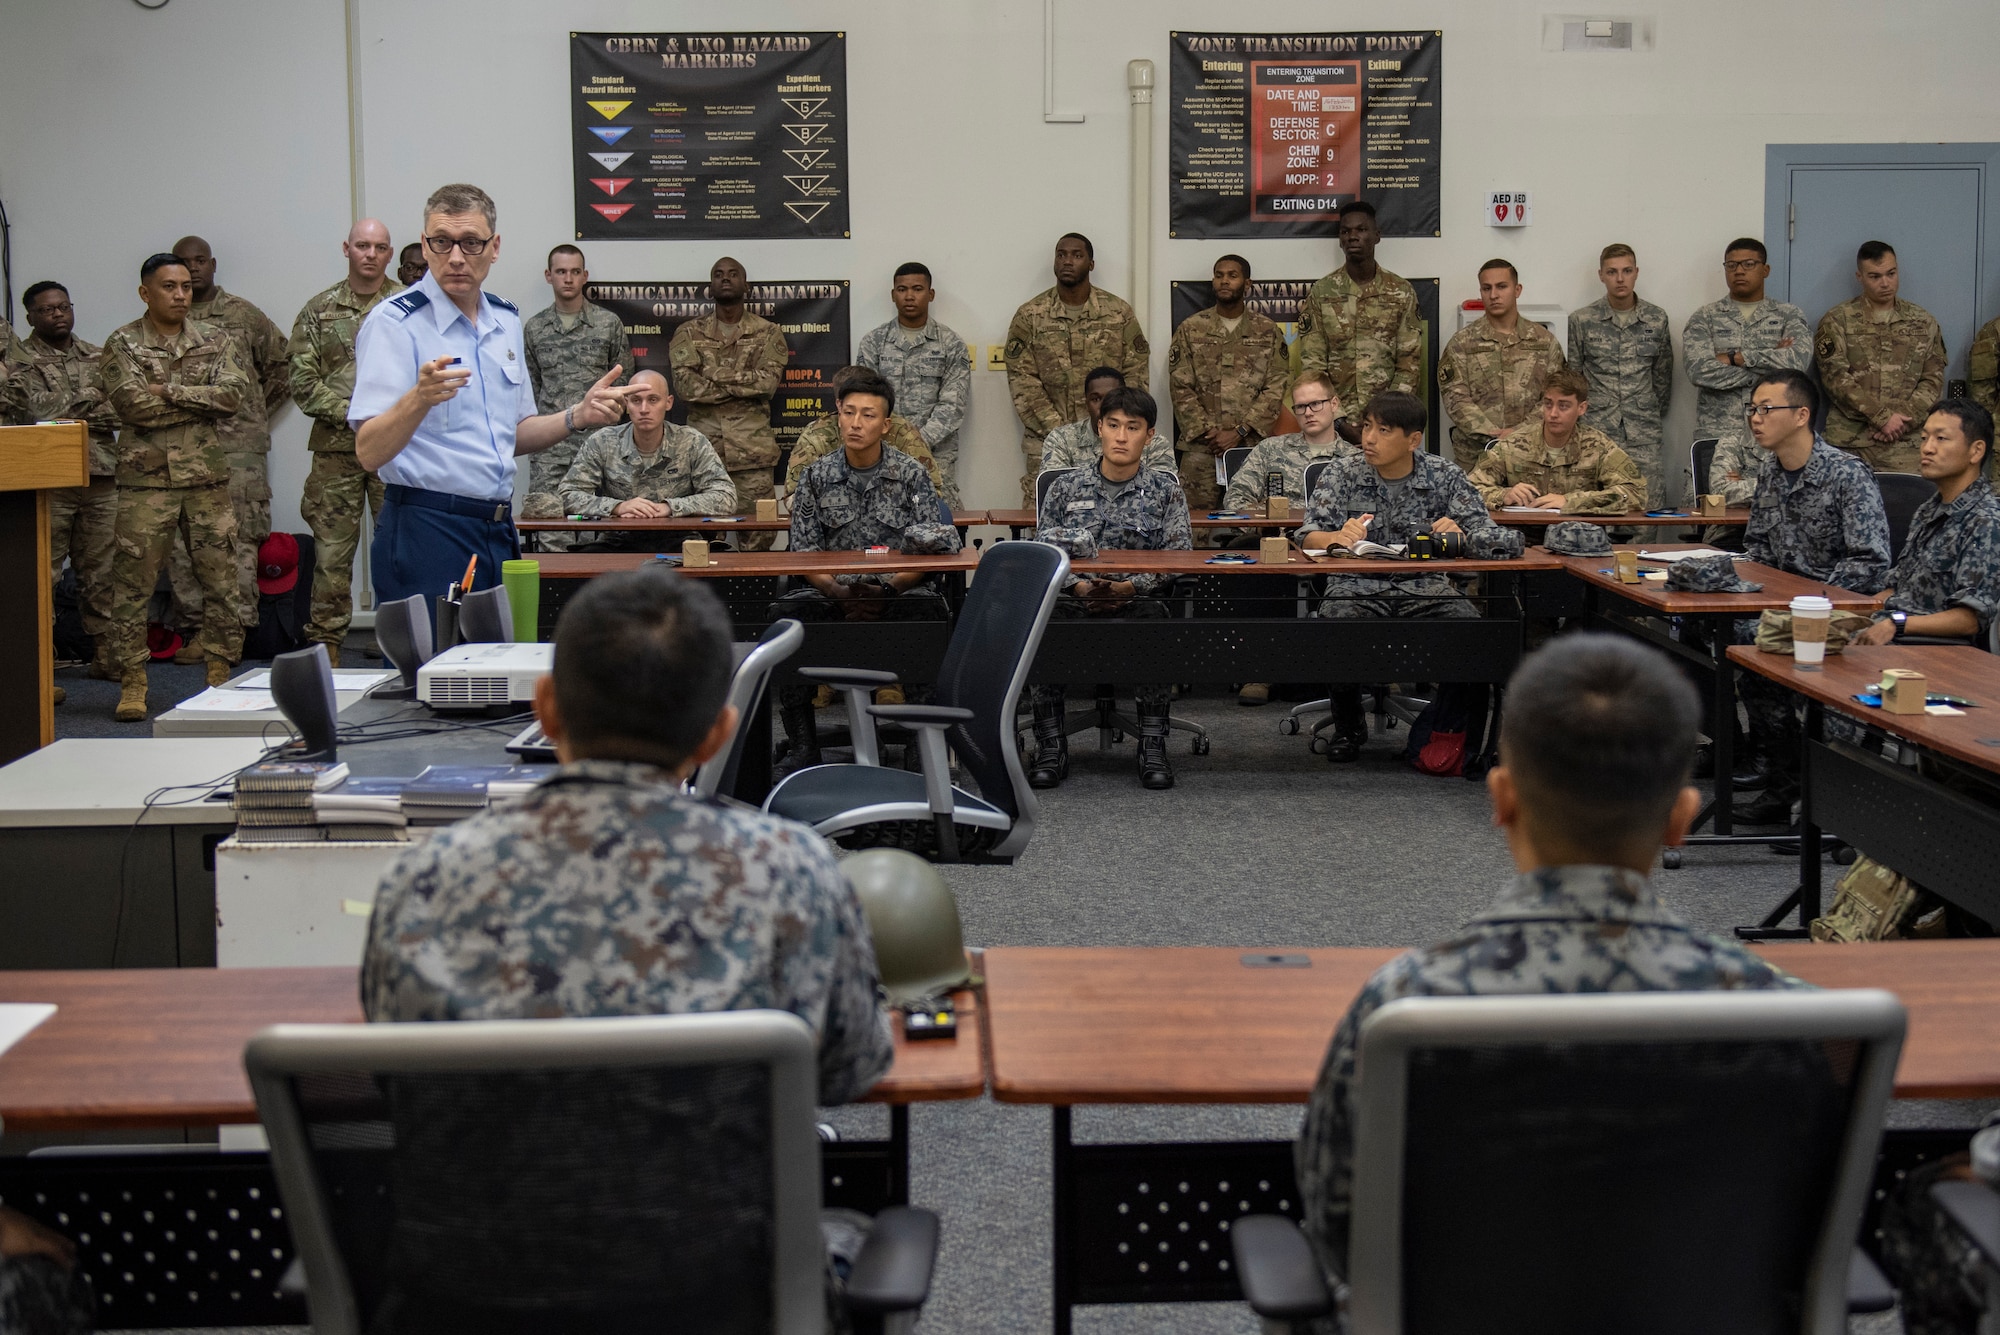 U.S. Air Force Col. David McCleese, 5th Air Force A4 director, speaks with the participants of Pacific Unity 2019 about the importance of the event prior to the classroom portion commencing at Yokota Air Base, Japan, August 20, 2019.